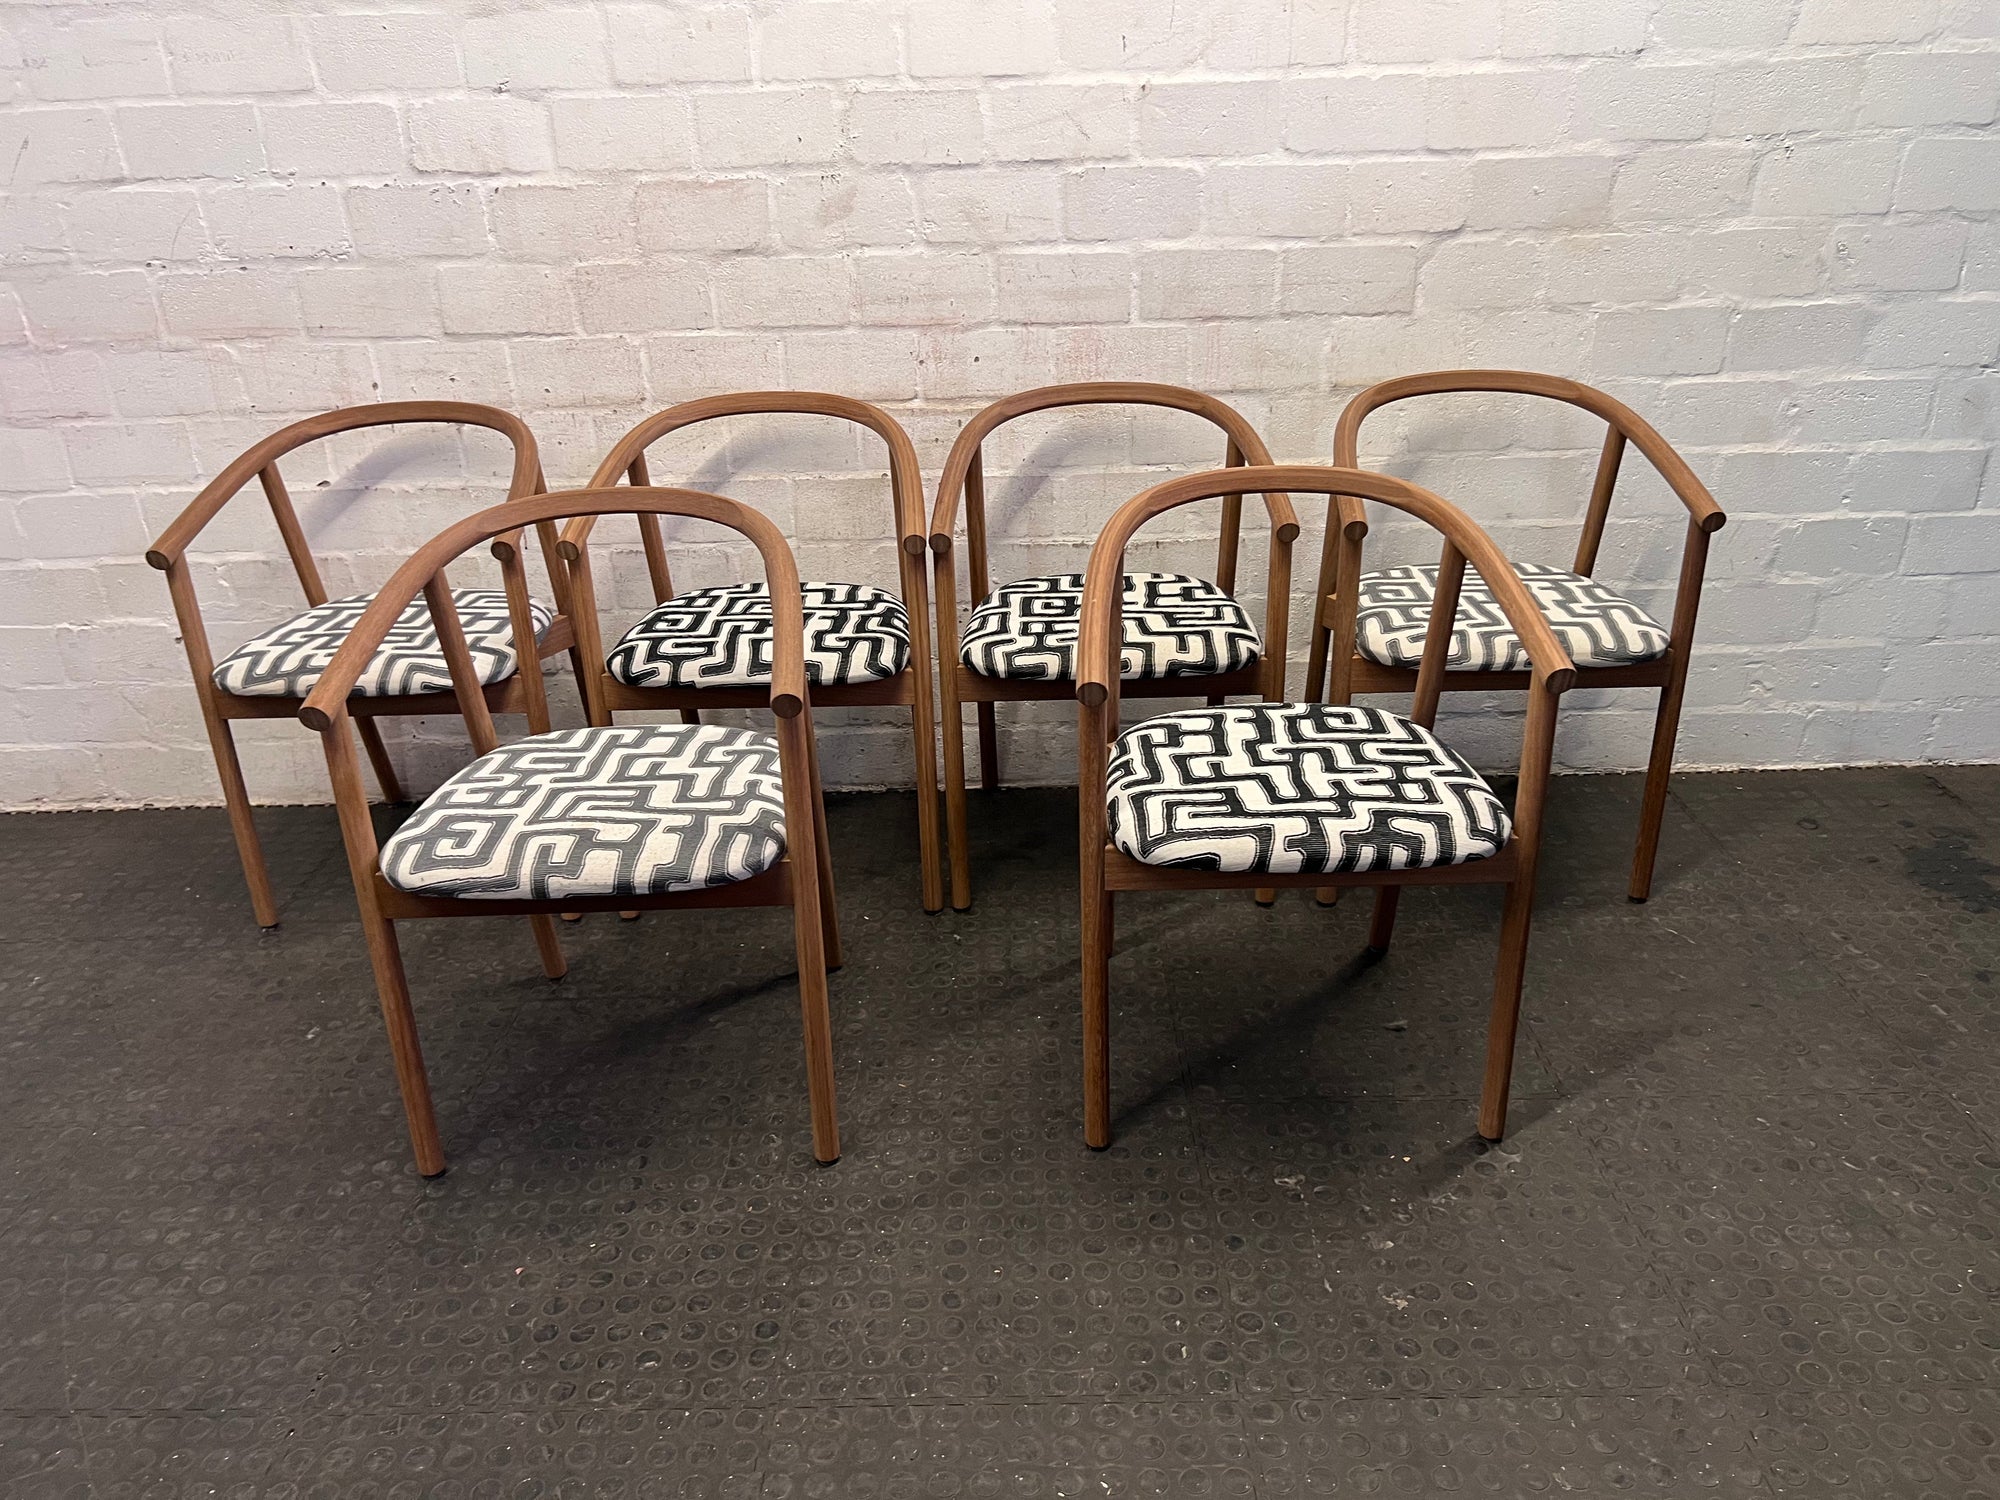 6 Modern Iron Wood Dining Chairs Designed by James Mudge (Sold as a set)